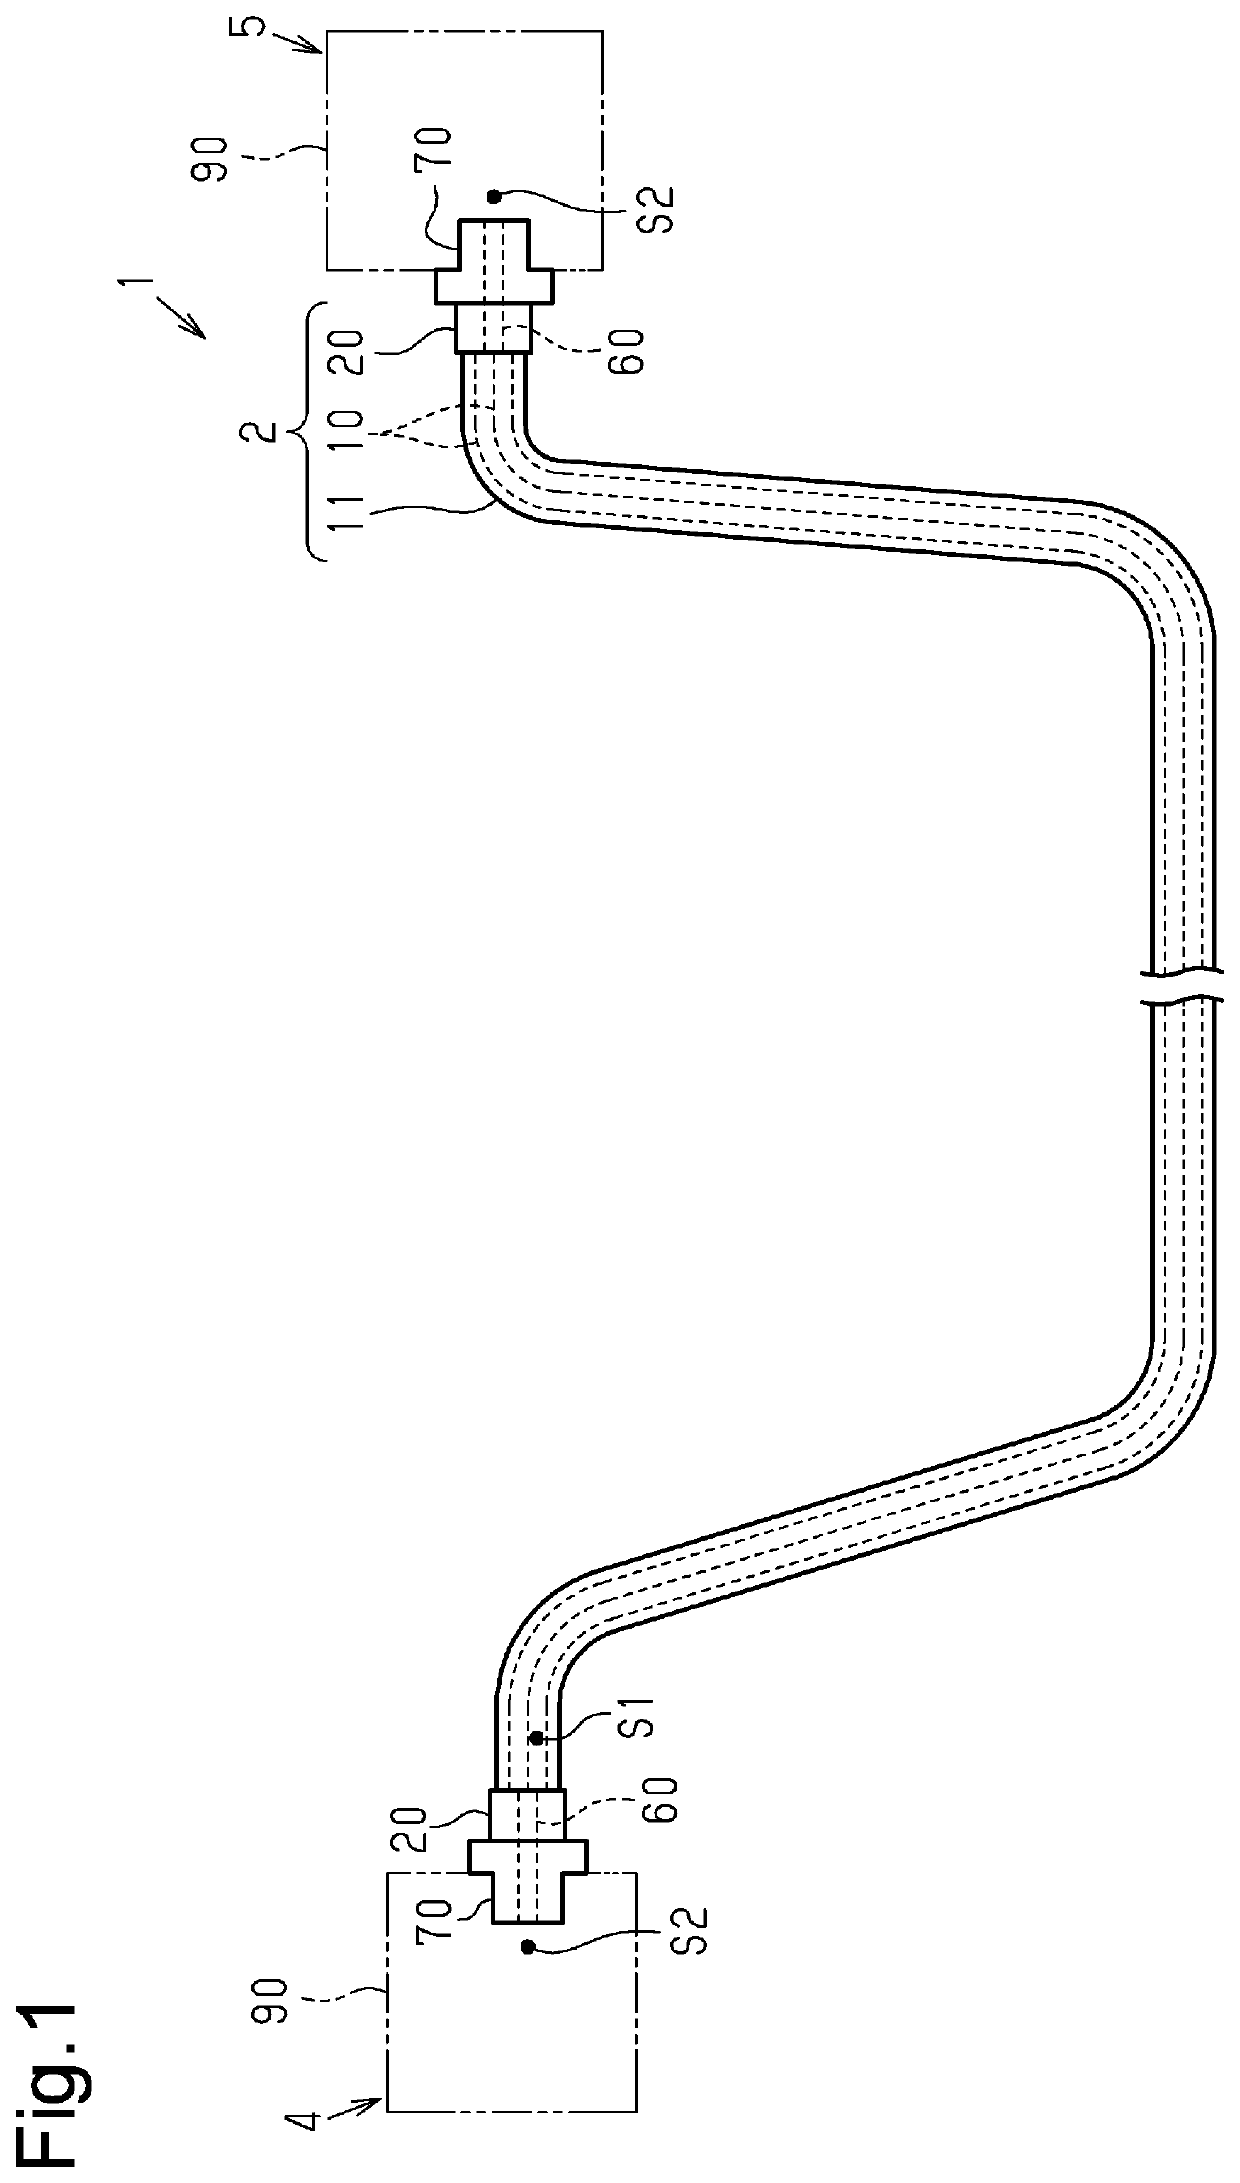 Connector and conduction path